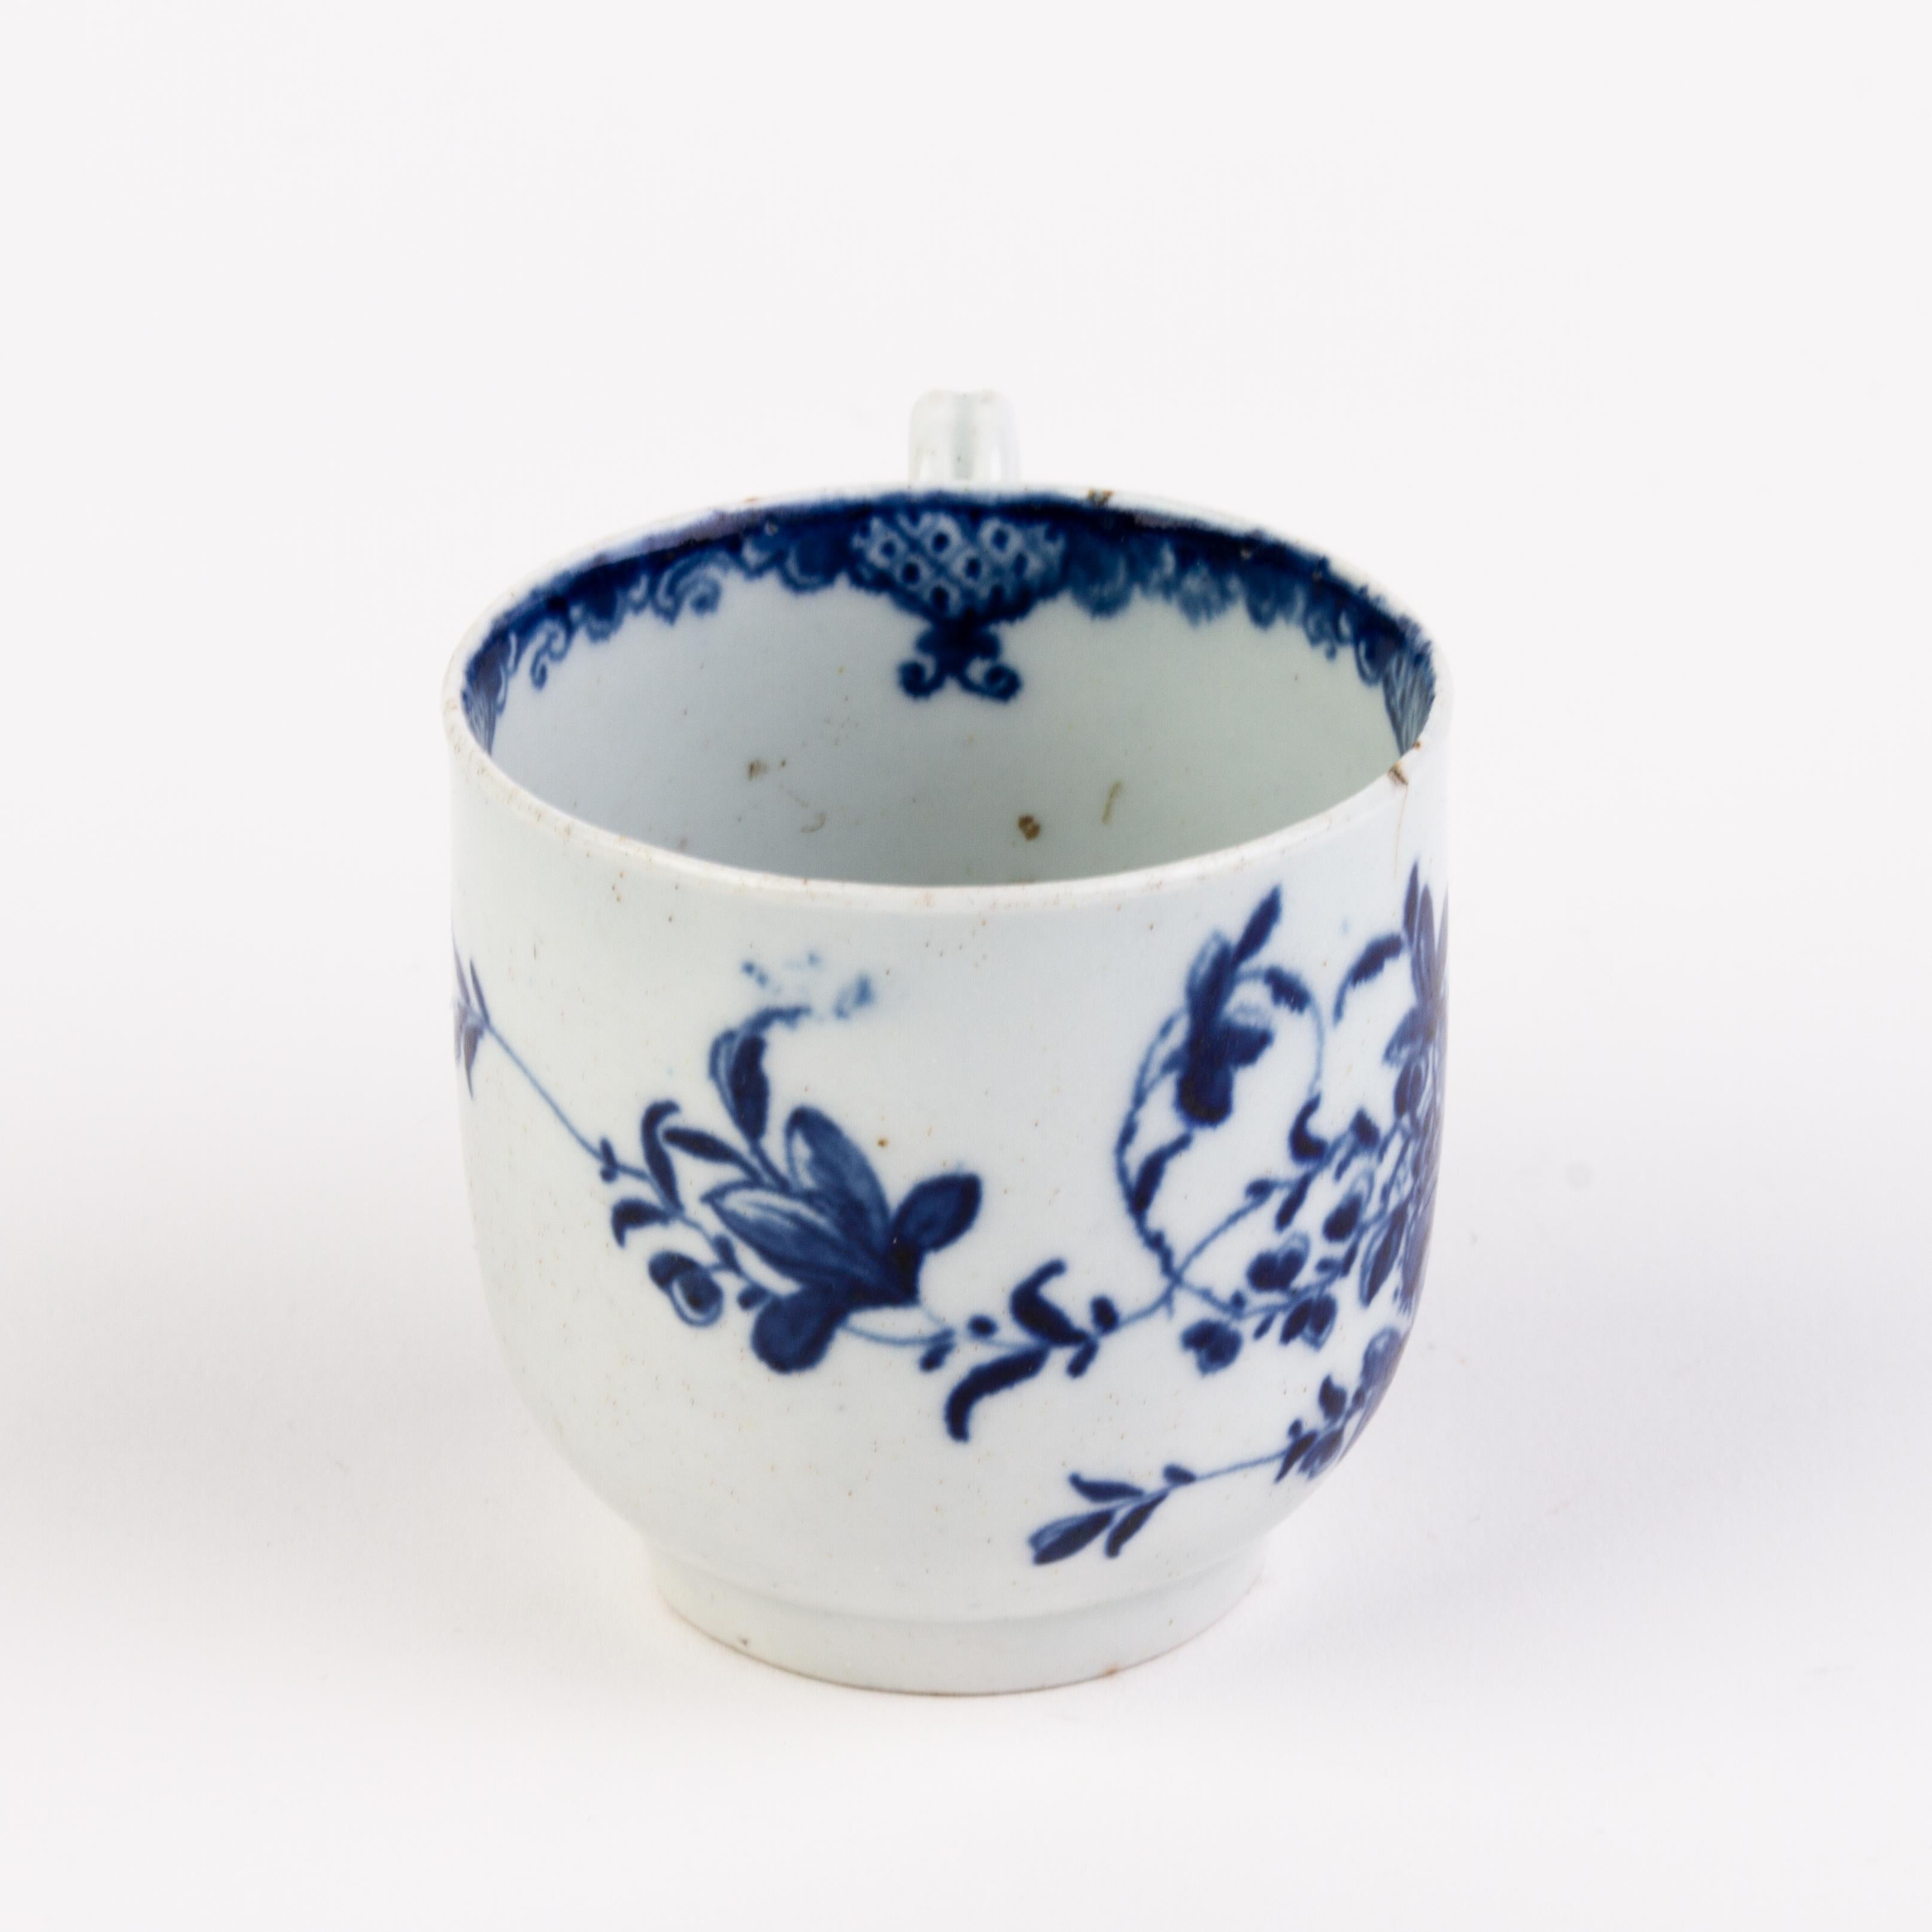 Late 18th Century Chinese Flowers Worcester Porcelain English Tea Cup
Good condition overall, as seen
From a private collection.
Free international shipping.